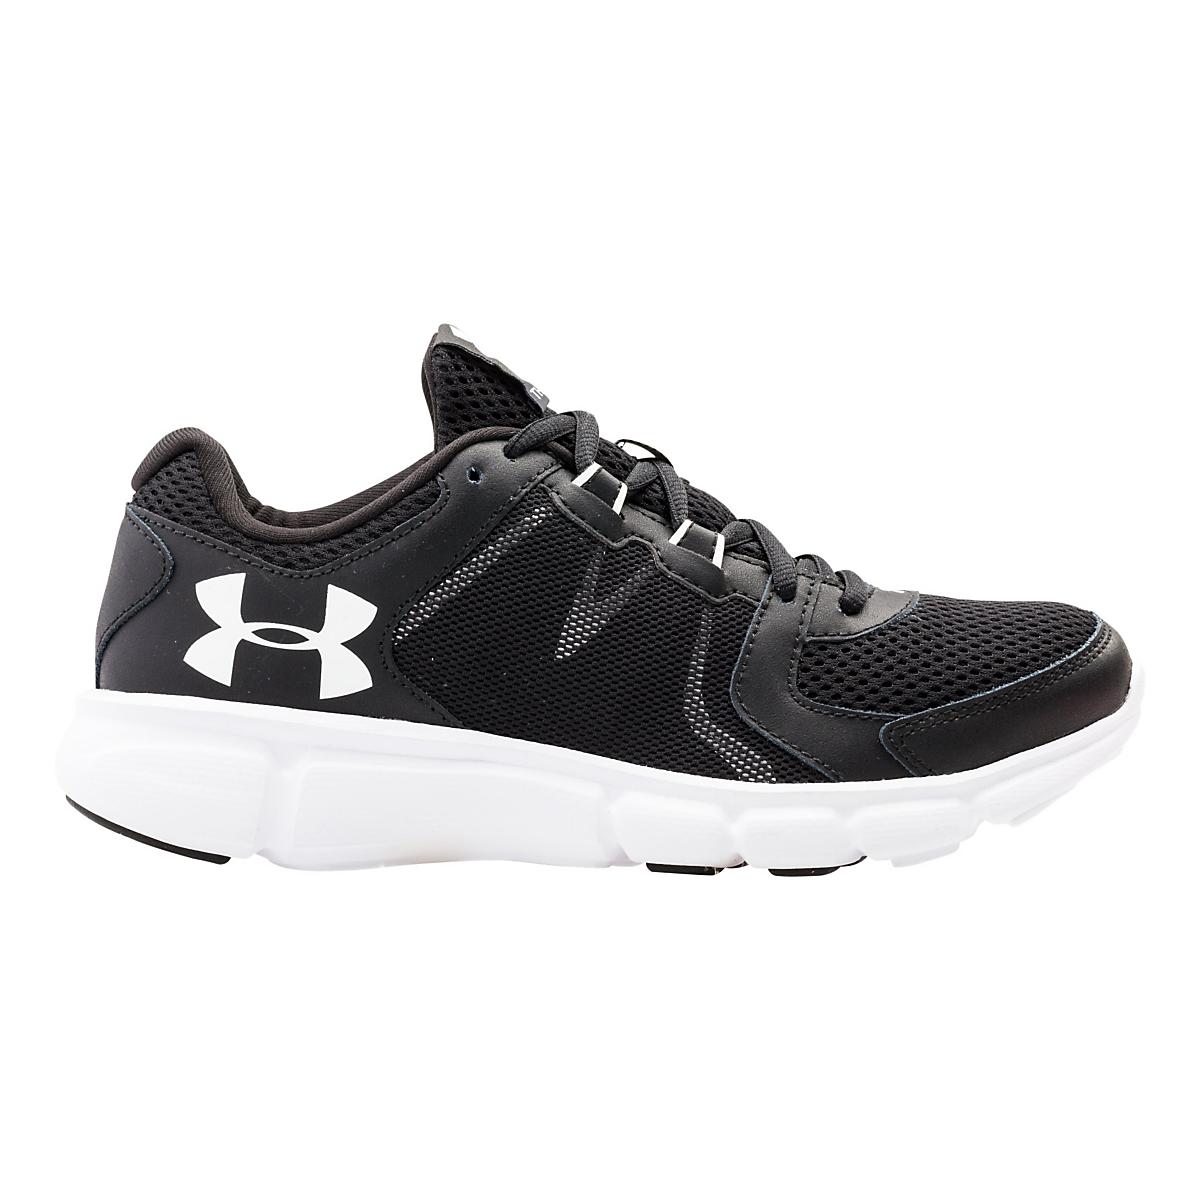 Womens Under Armour Thrill 2 Running Shoe at Road Runner Sports